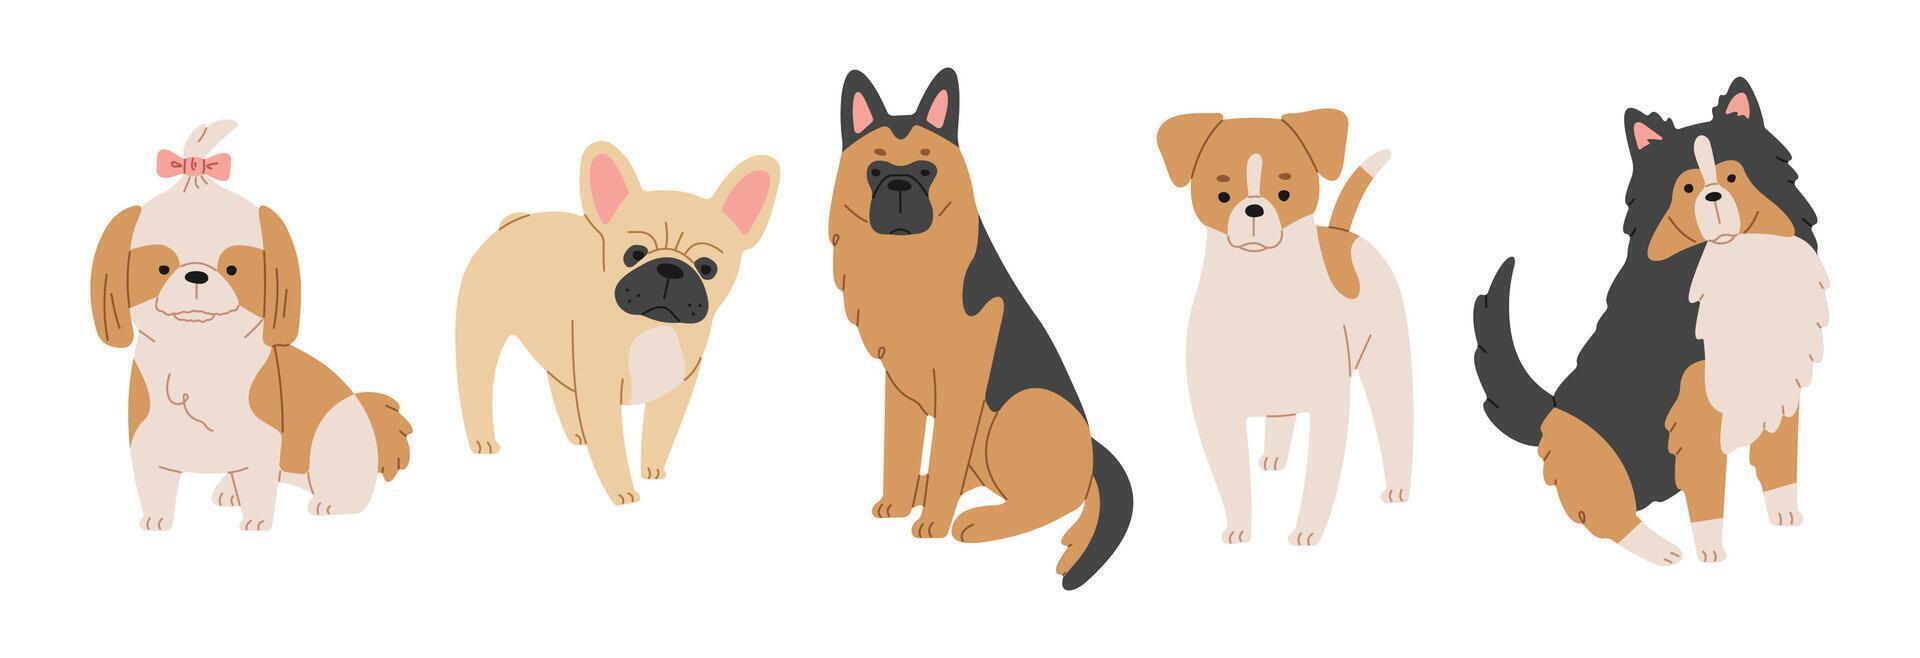 Dogs 4cute on a white background, vector illustration.